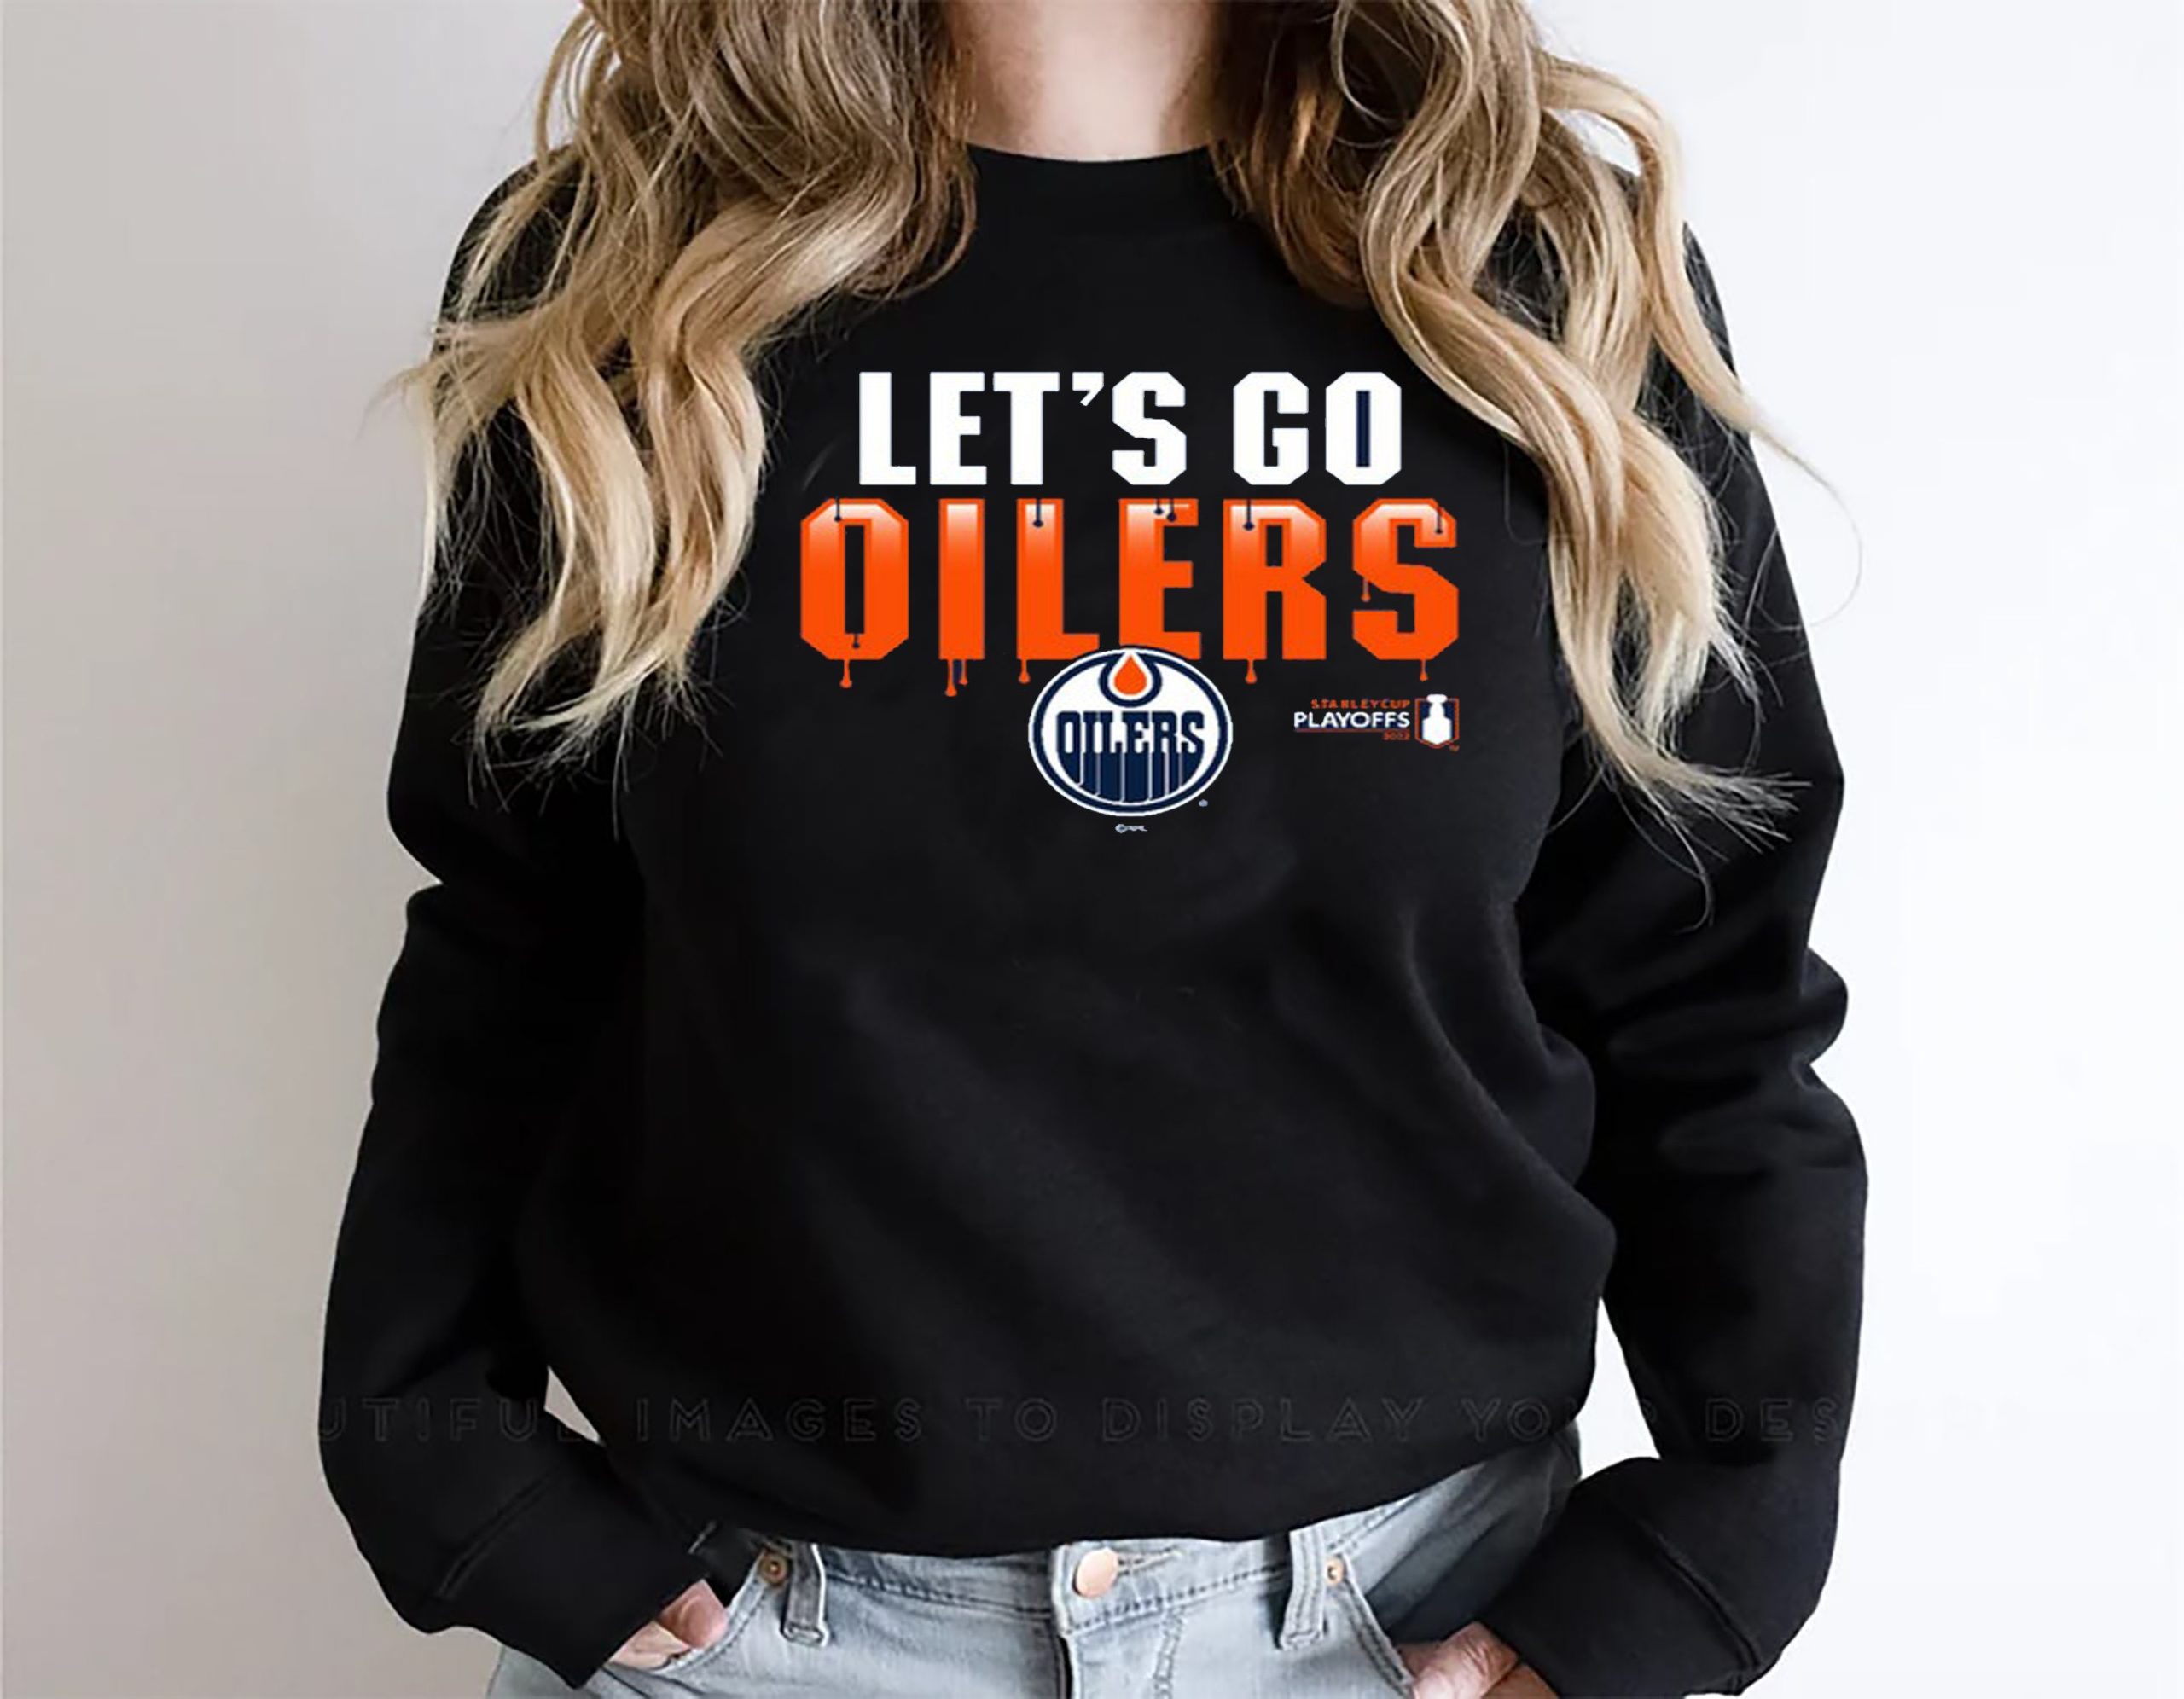 Let's Go Oilers Oilers Edmonton Oilers 2022 Stanley Cup Playoffs Unisex T-Shirt